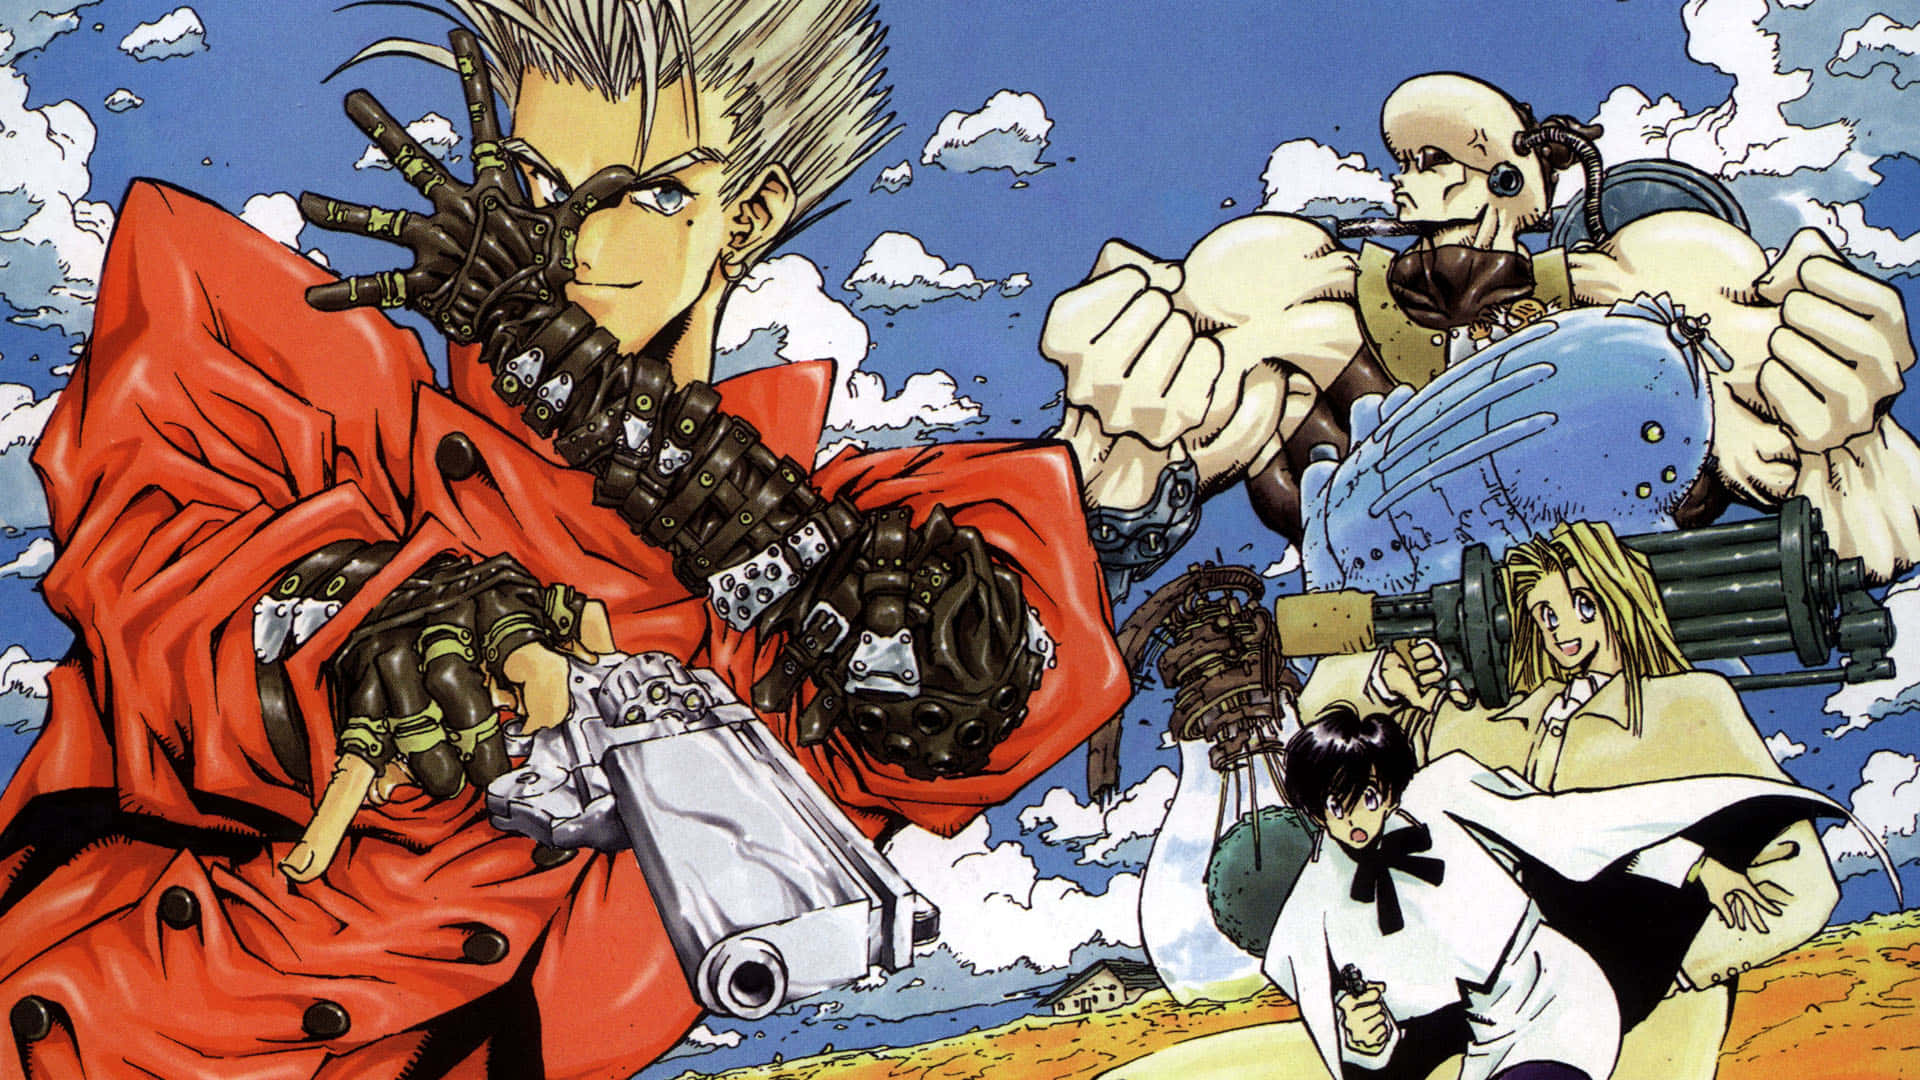 Vash the Stampede, the lead character in the popular anime, Trigun